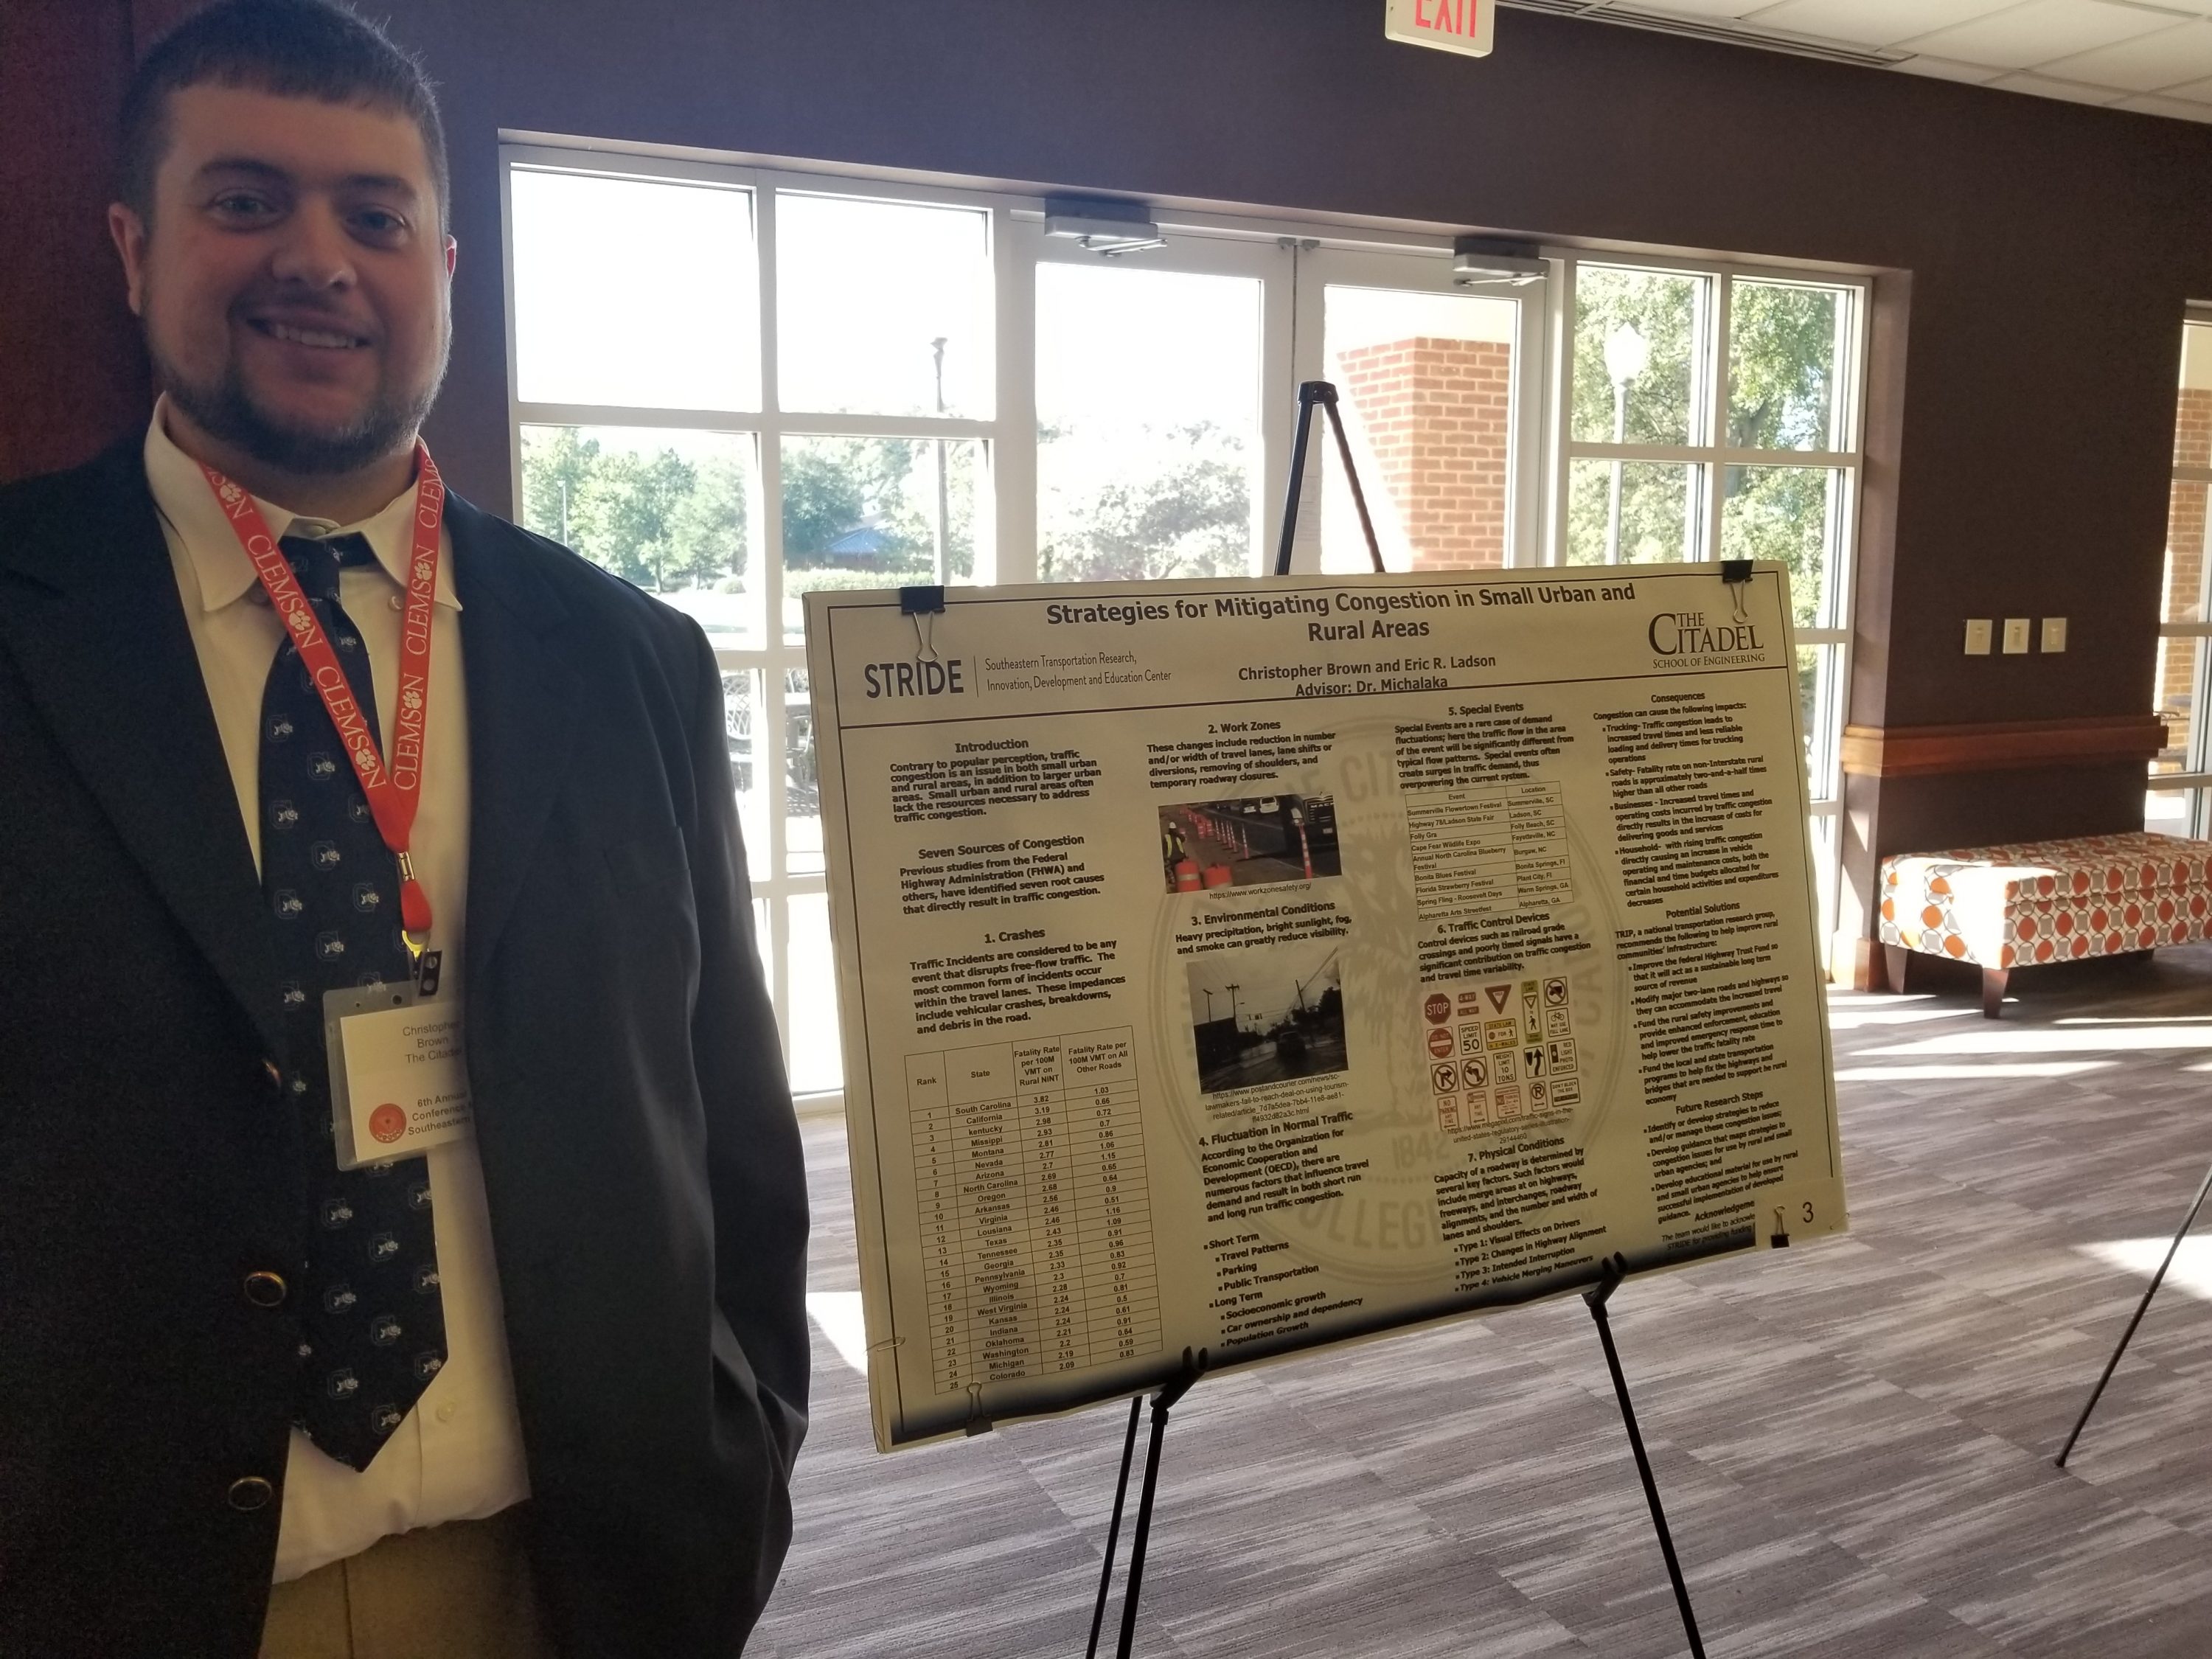 Chris Brown of the Citadel won 2nd Place for his poster on Traffic Congestion, Planning, Rural Transportation at the 6th Annual UTC Conference for the Southeastern Region at Clemson, S.C.